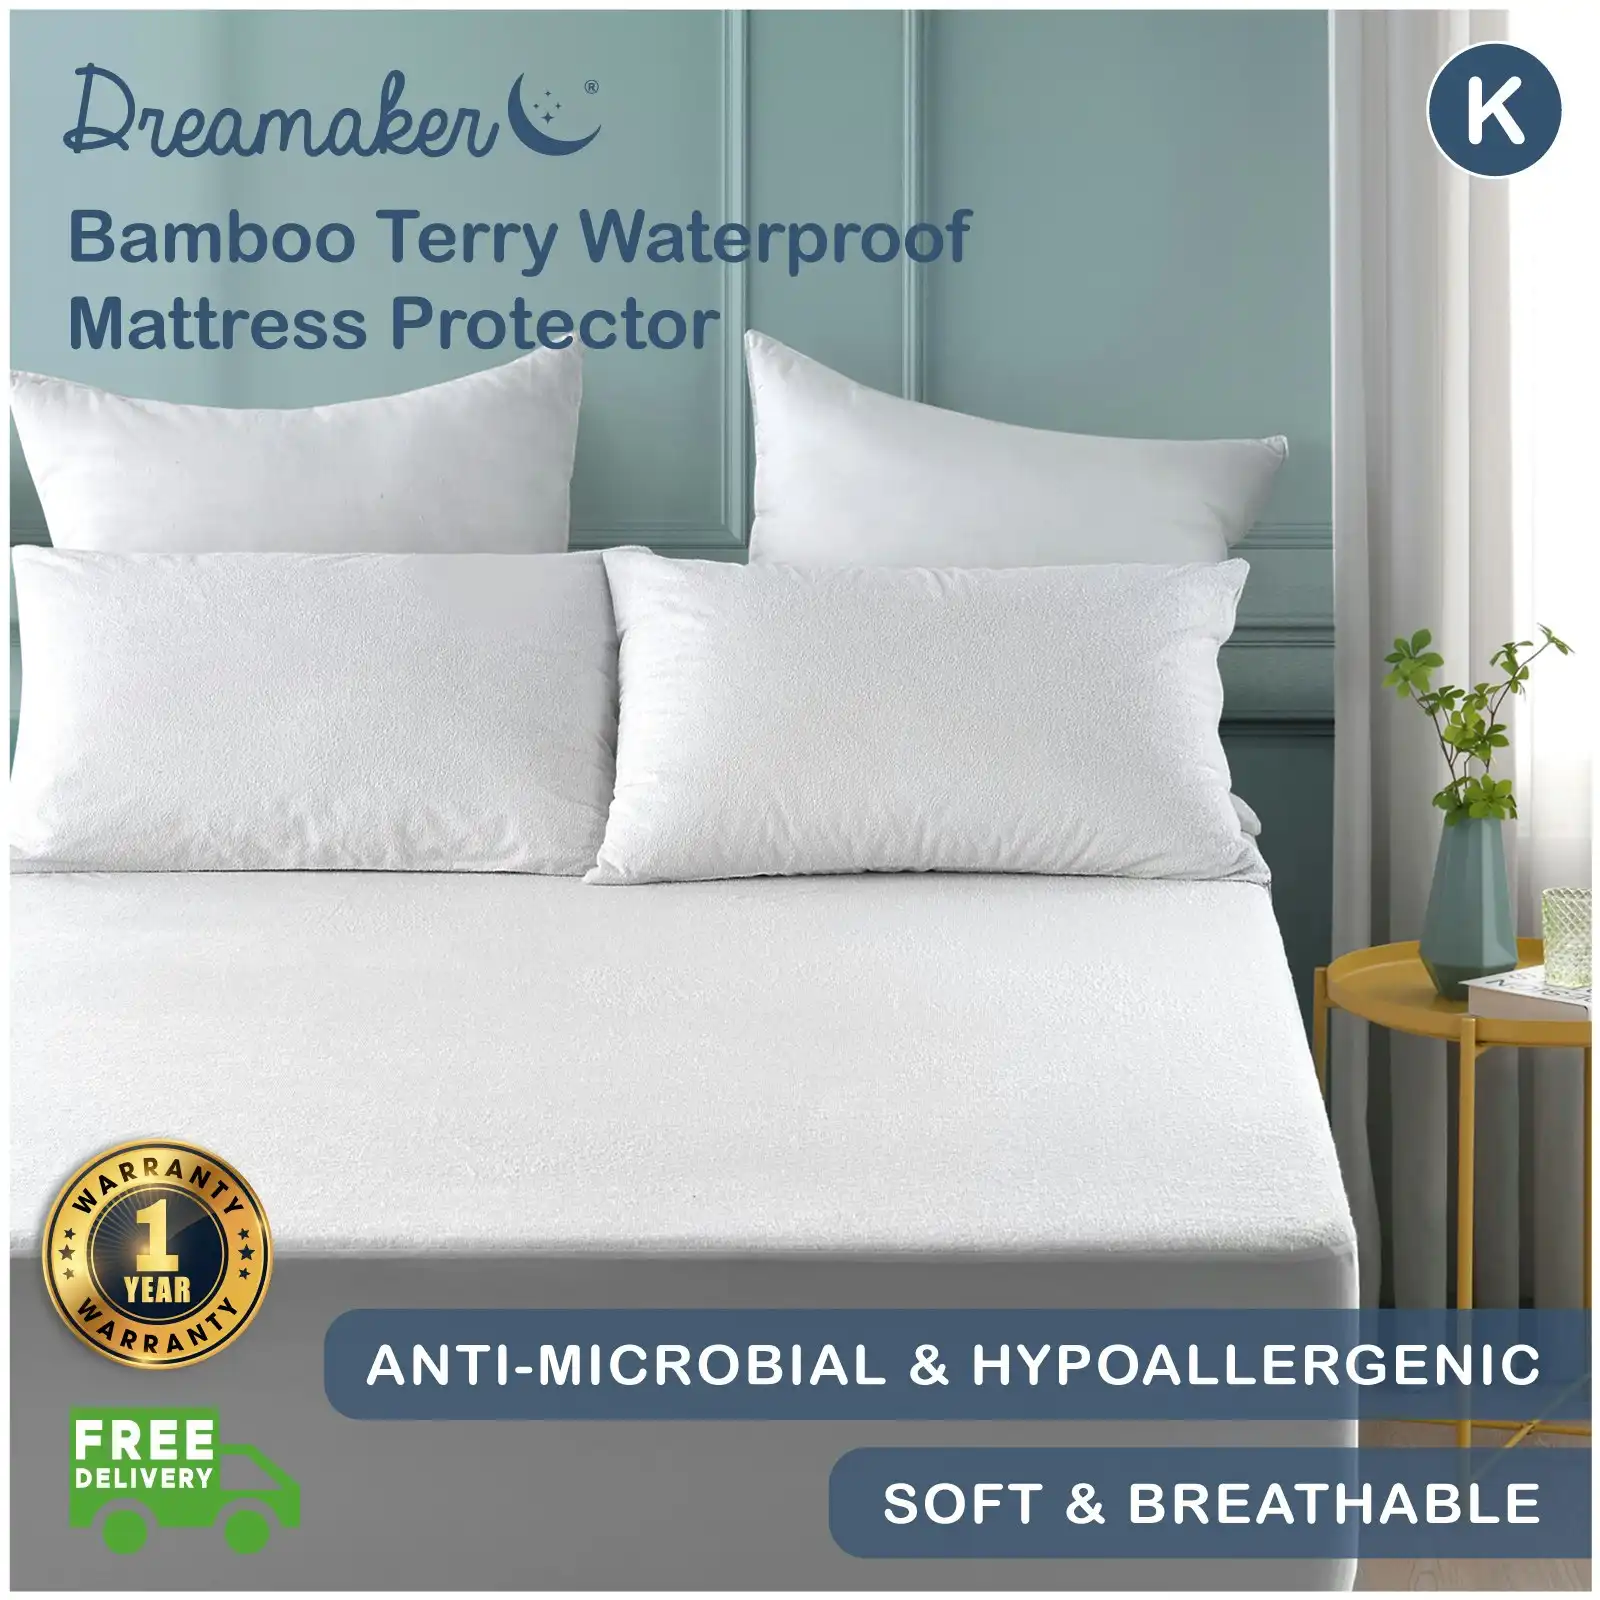 Dreamaker Bamboo Terry Waterproof Mattress Protector King Bed